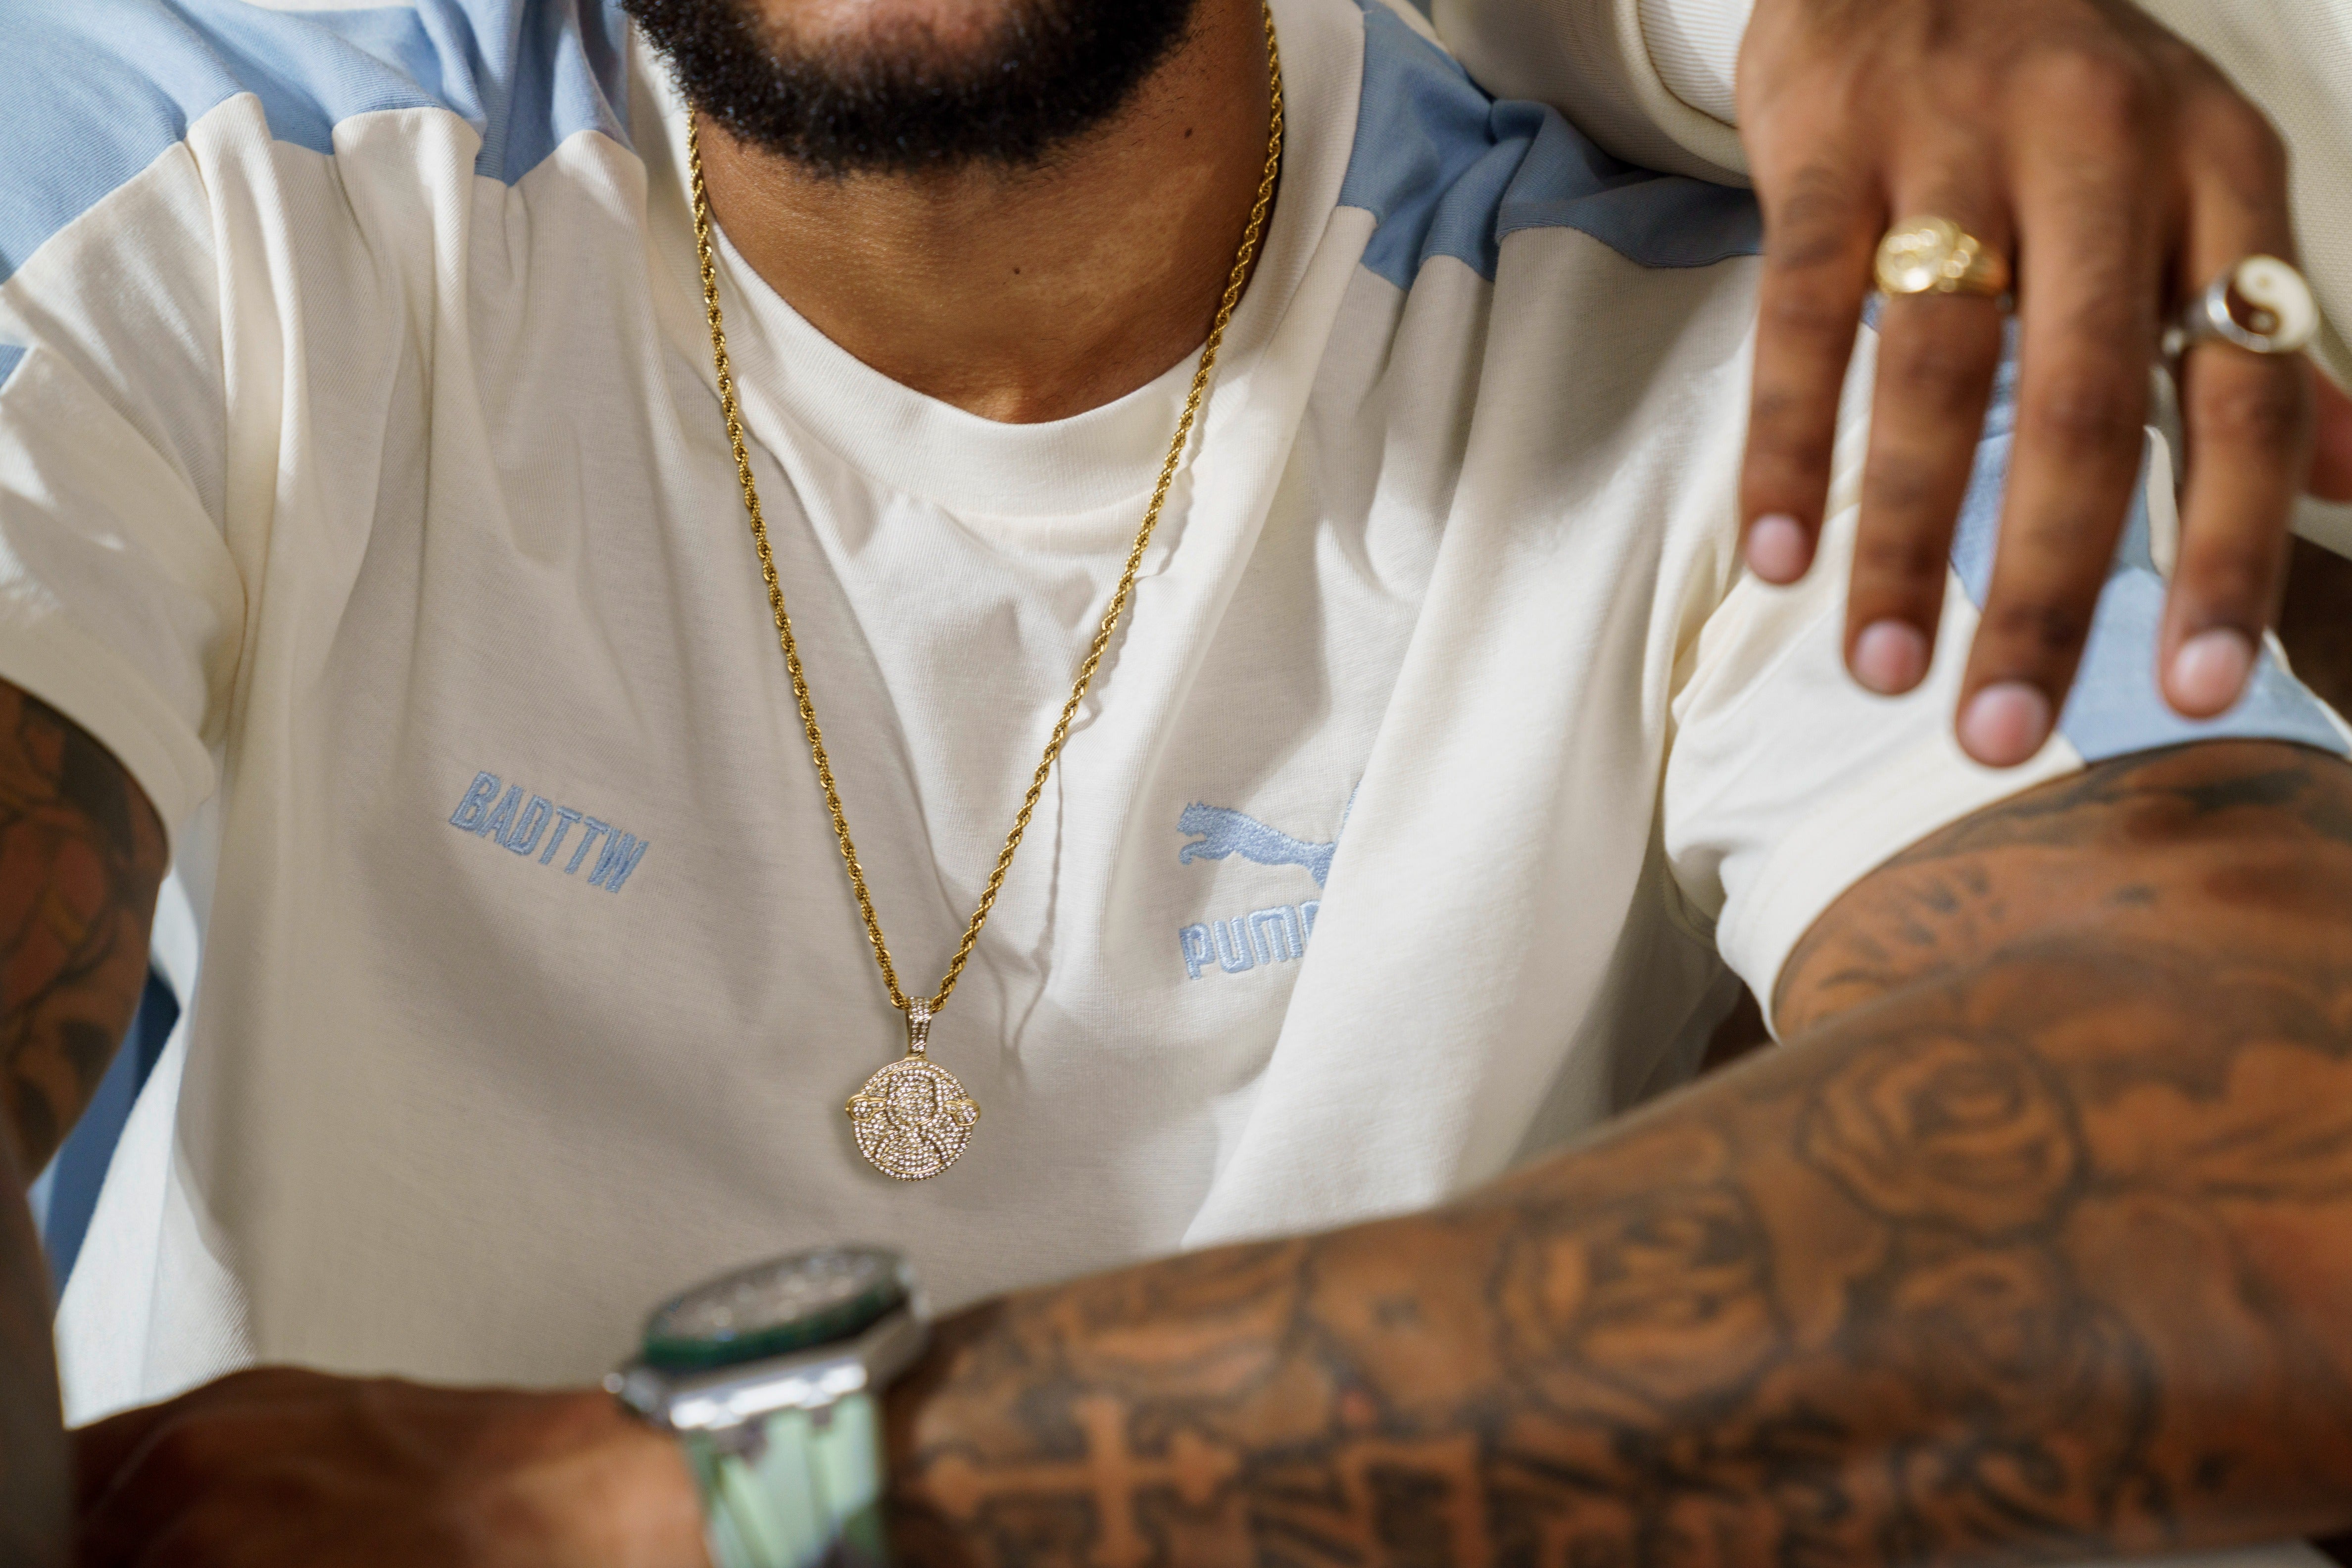 PUMA x BADTTW – PUMA collabs with luxury line of Memphis Depay Clothing 